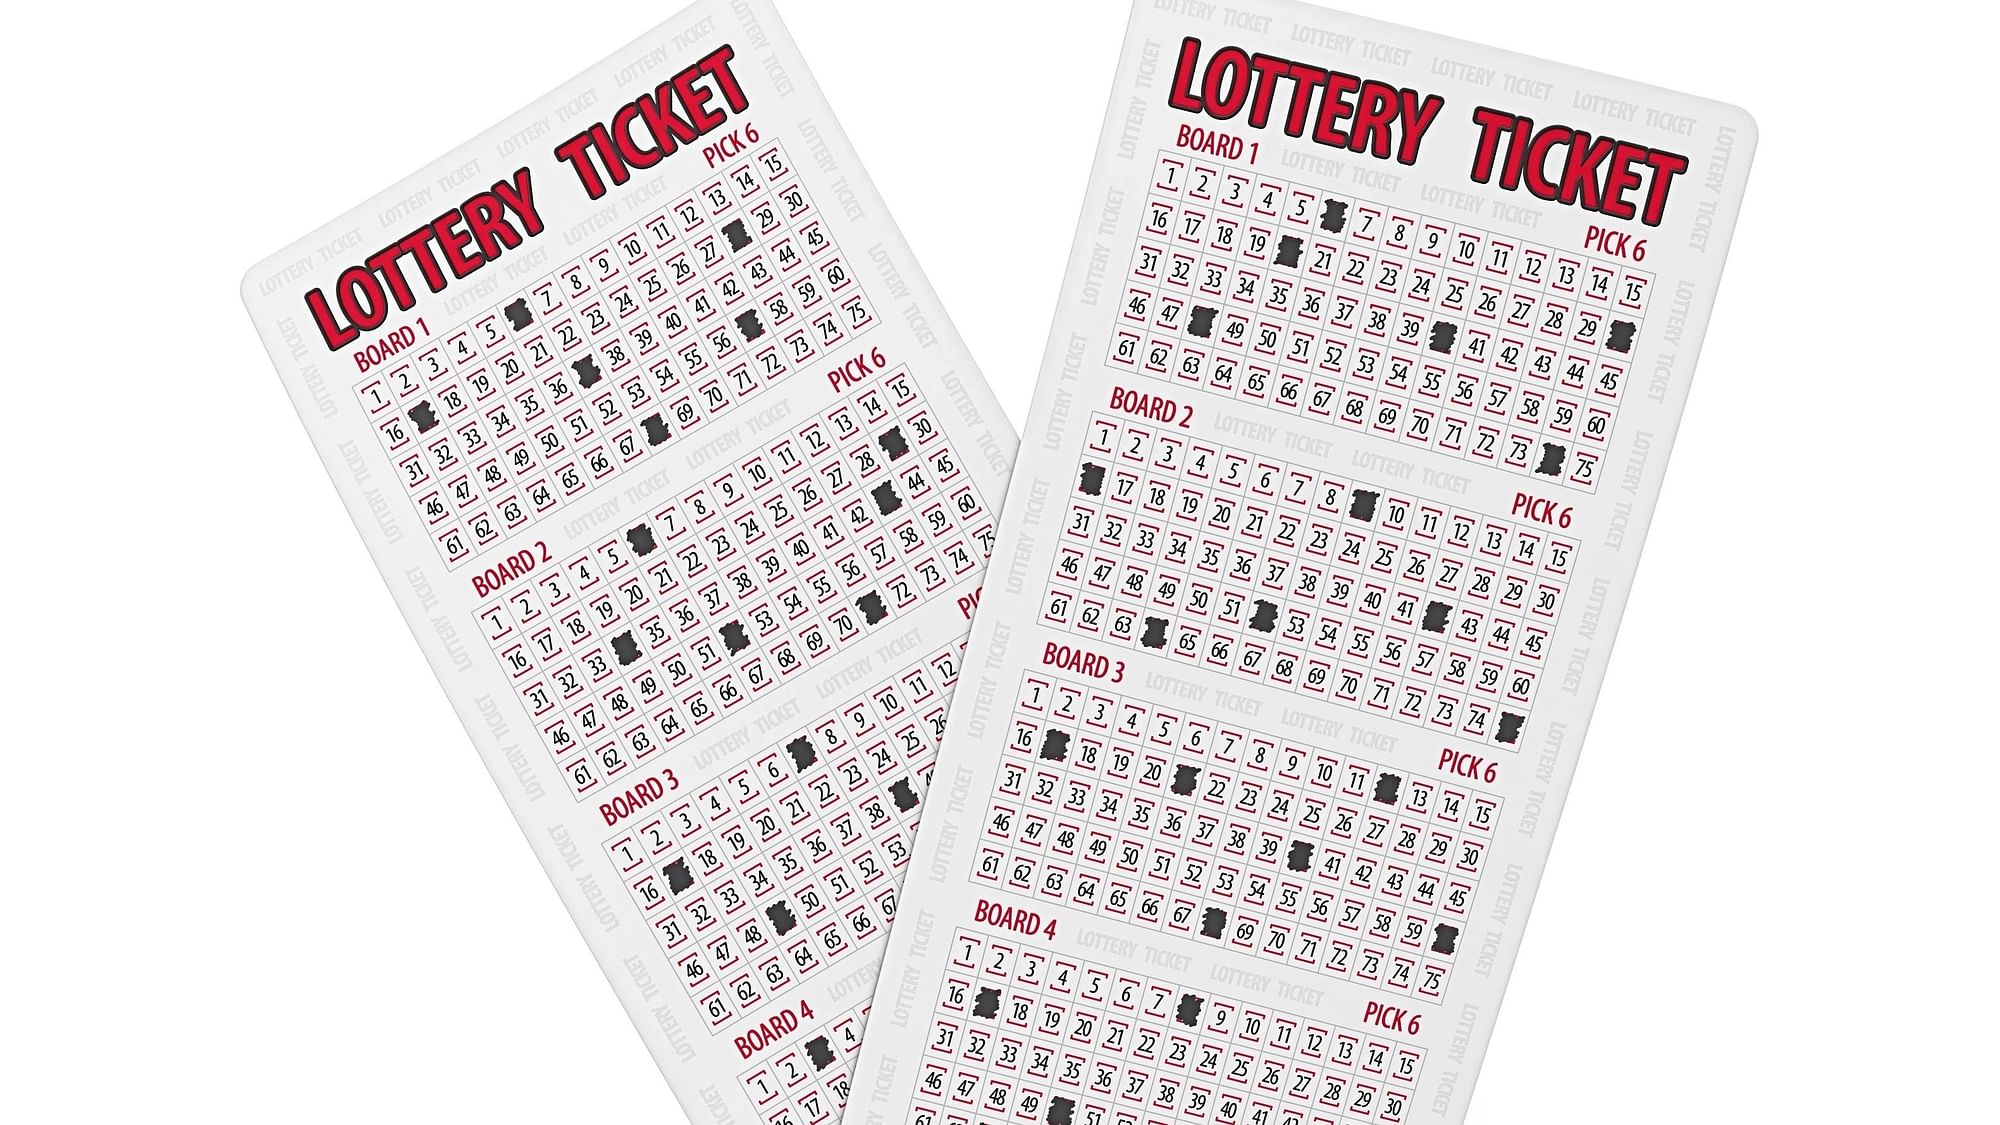 Kerala Karunya KR 369 lottery draw results 2018, winners list released at  keralalotteries.com | Today's Kerala Lottery Results 2018 - The Statesman